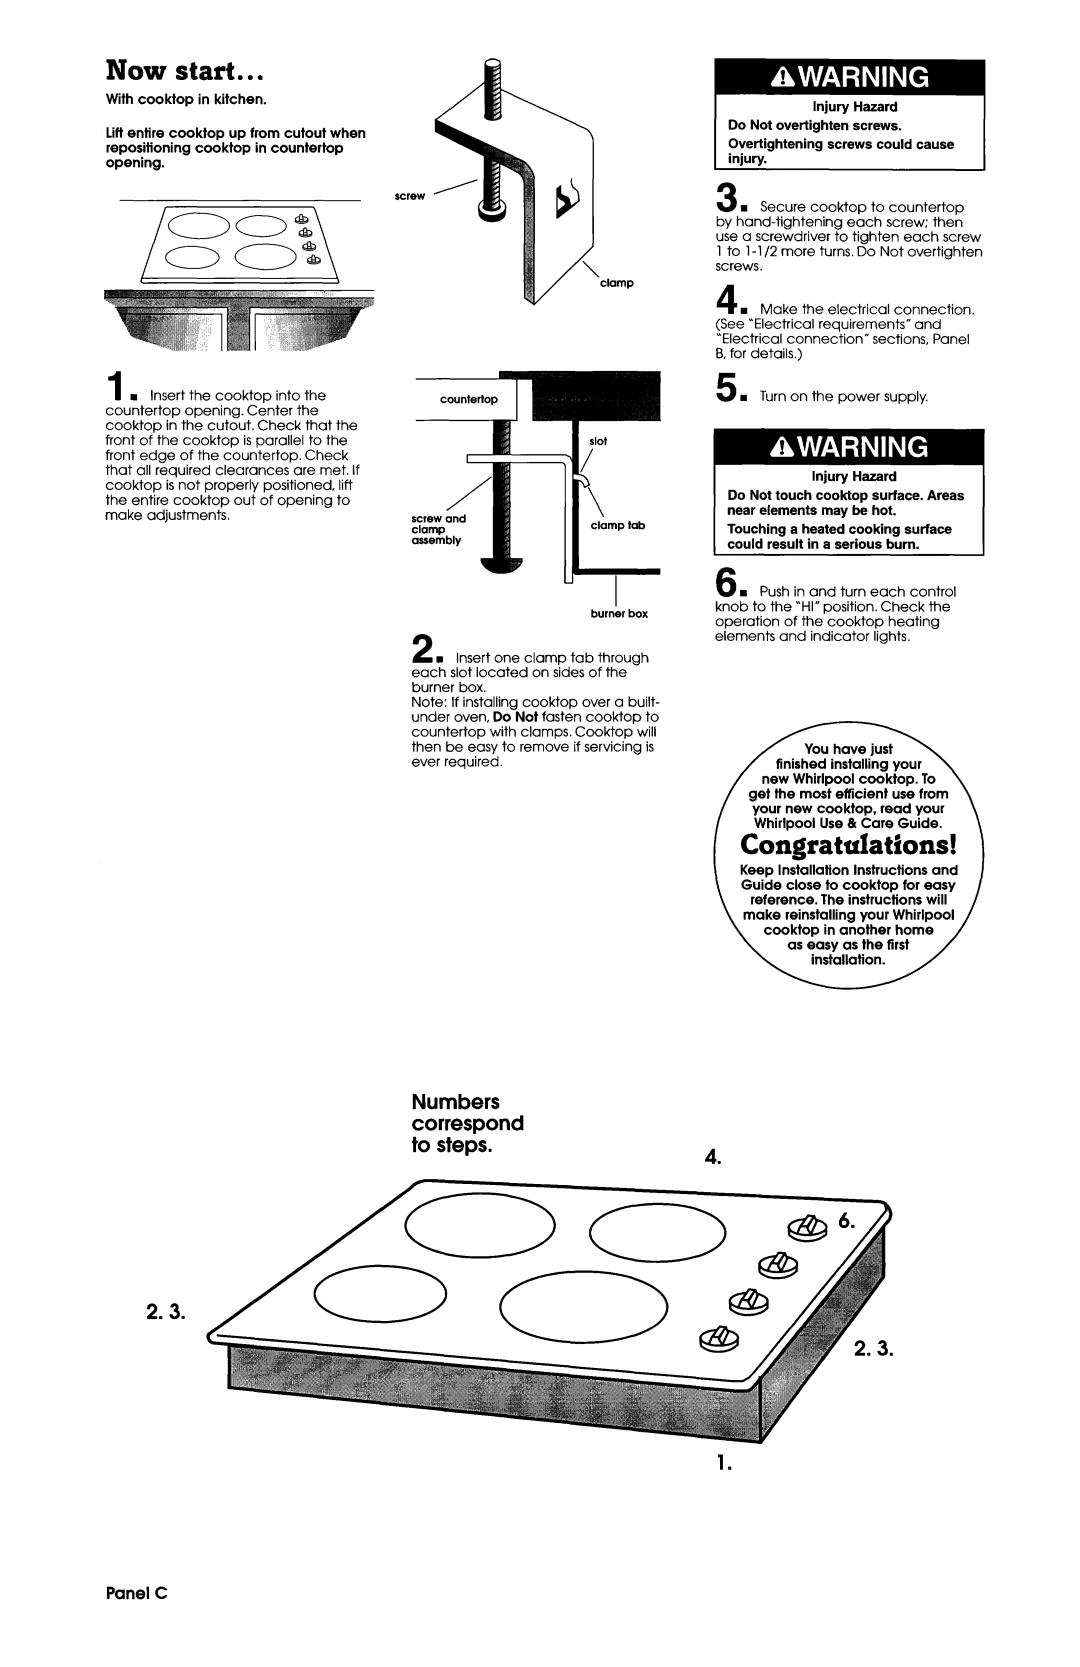 Whirlpool 4454653 installation instructions Now start, Coigratulations, Numbers correspond to steps, Panel C 